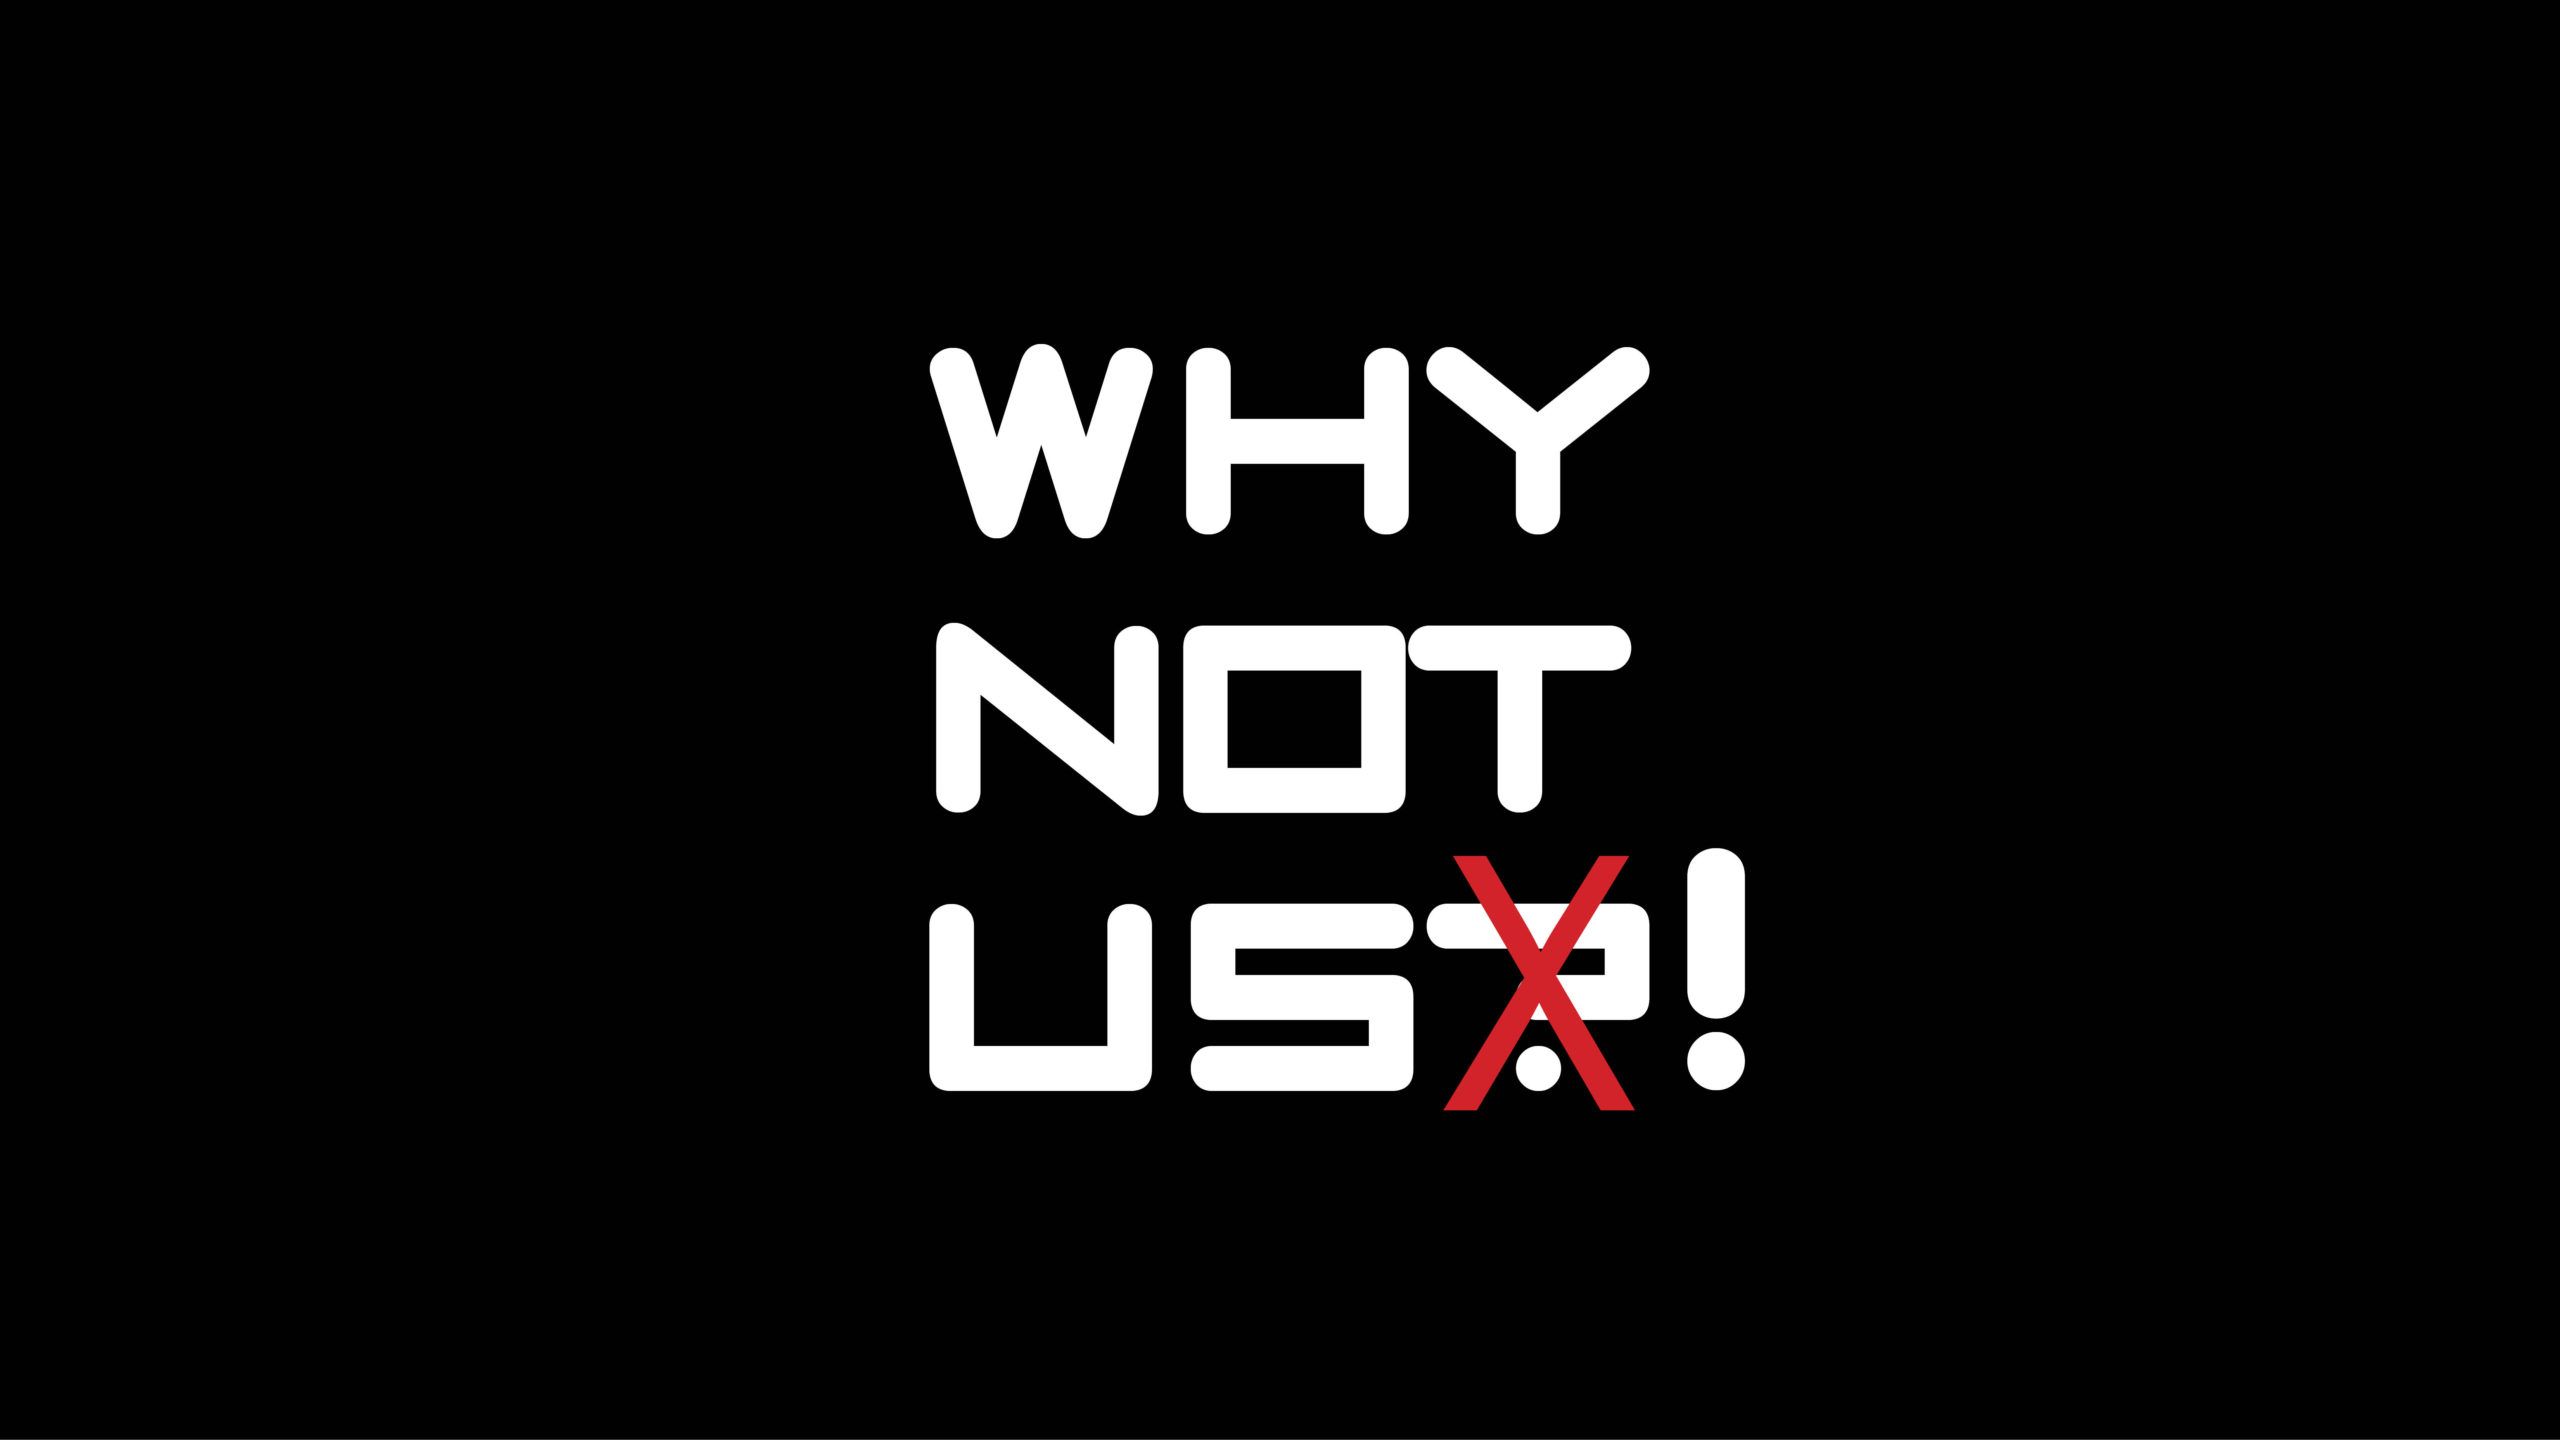 Why Not Us! – Part 2